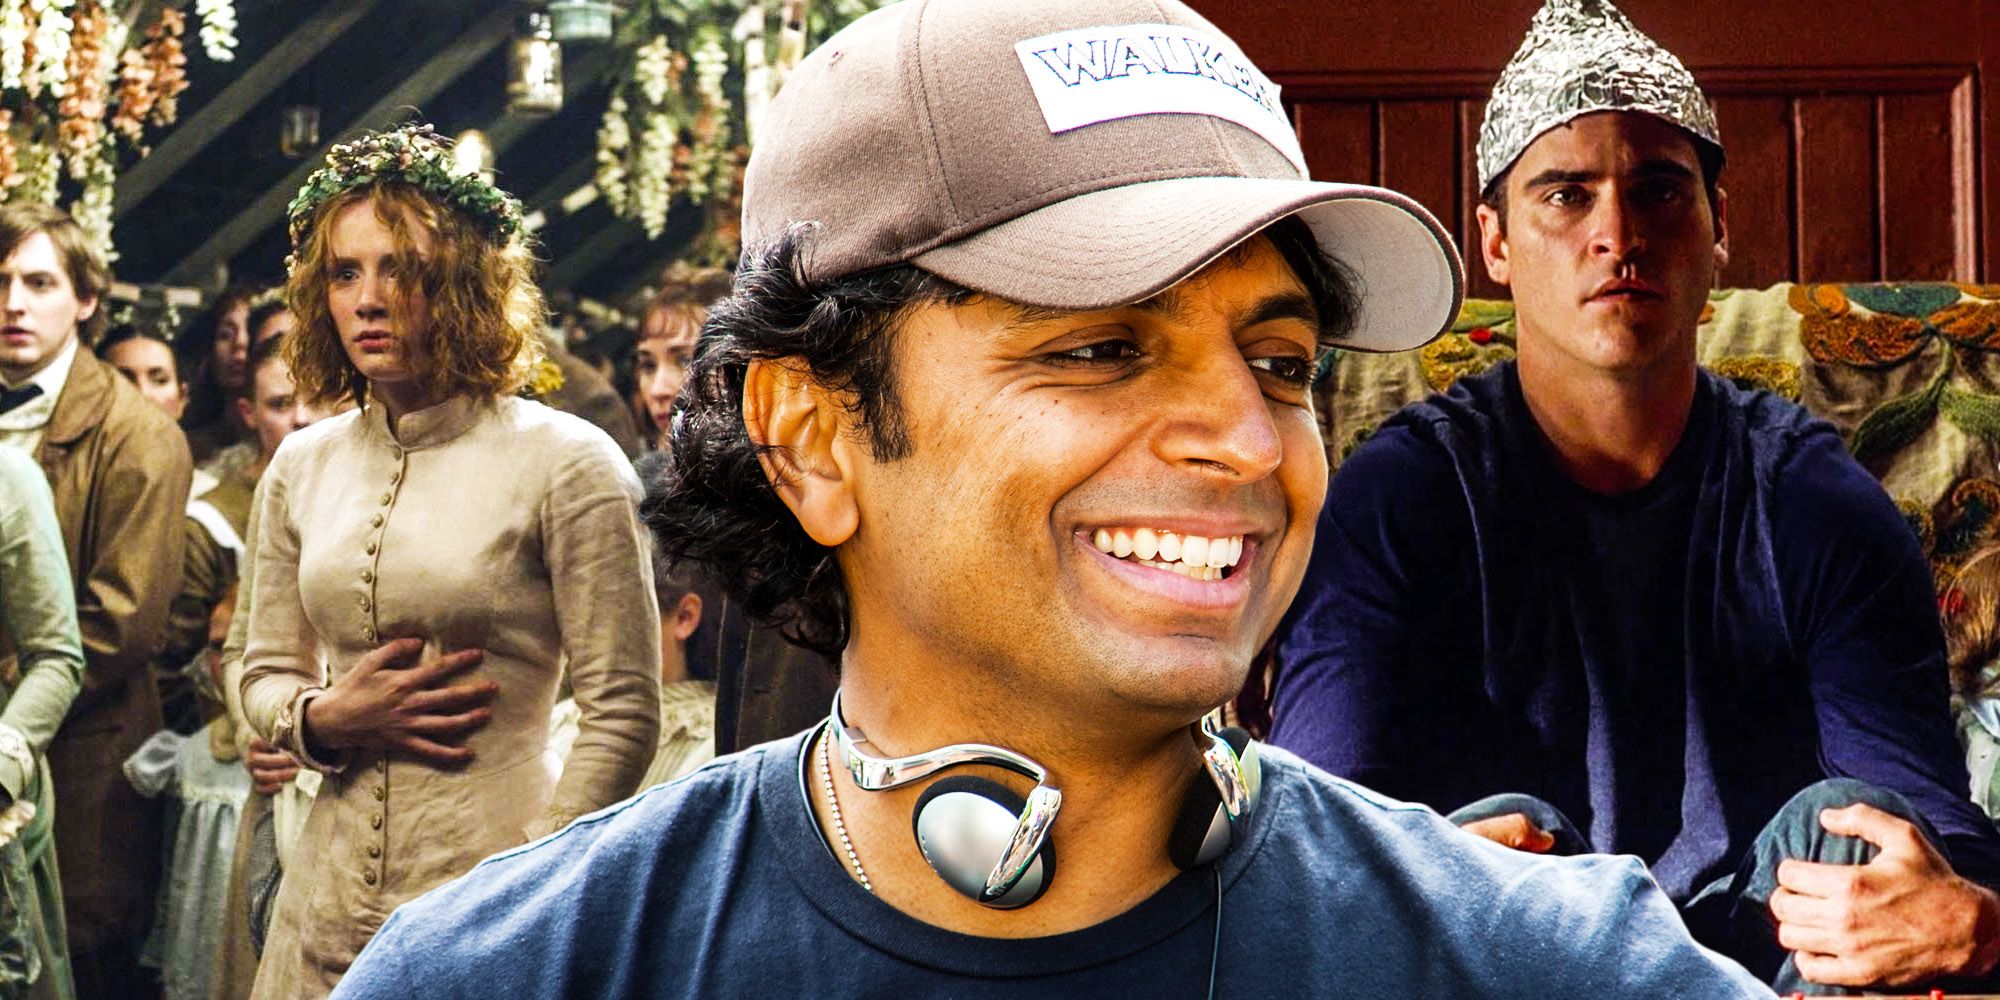 Movies Can Be Both Silly And Twisty (& M Night Shyamalan Is The Master)